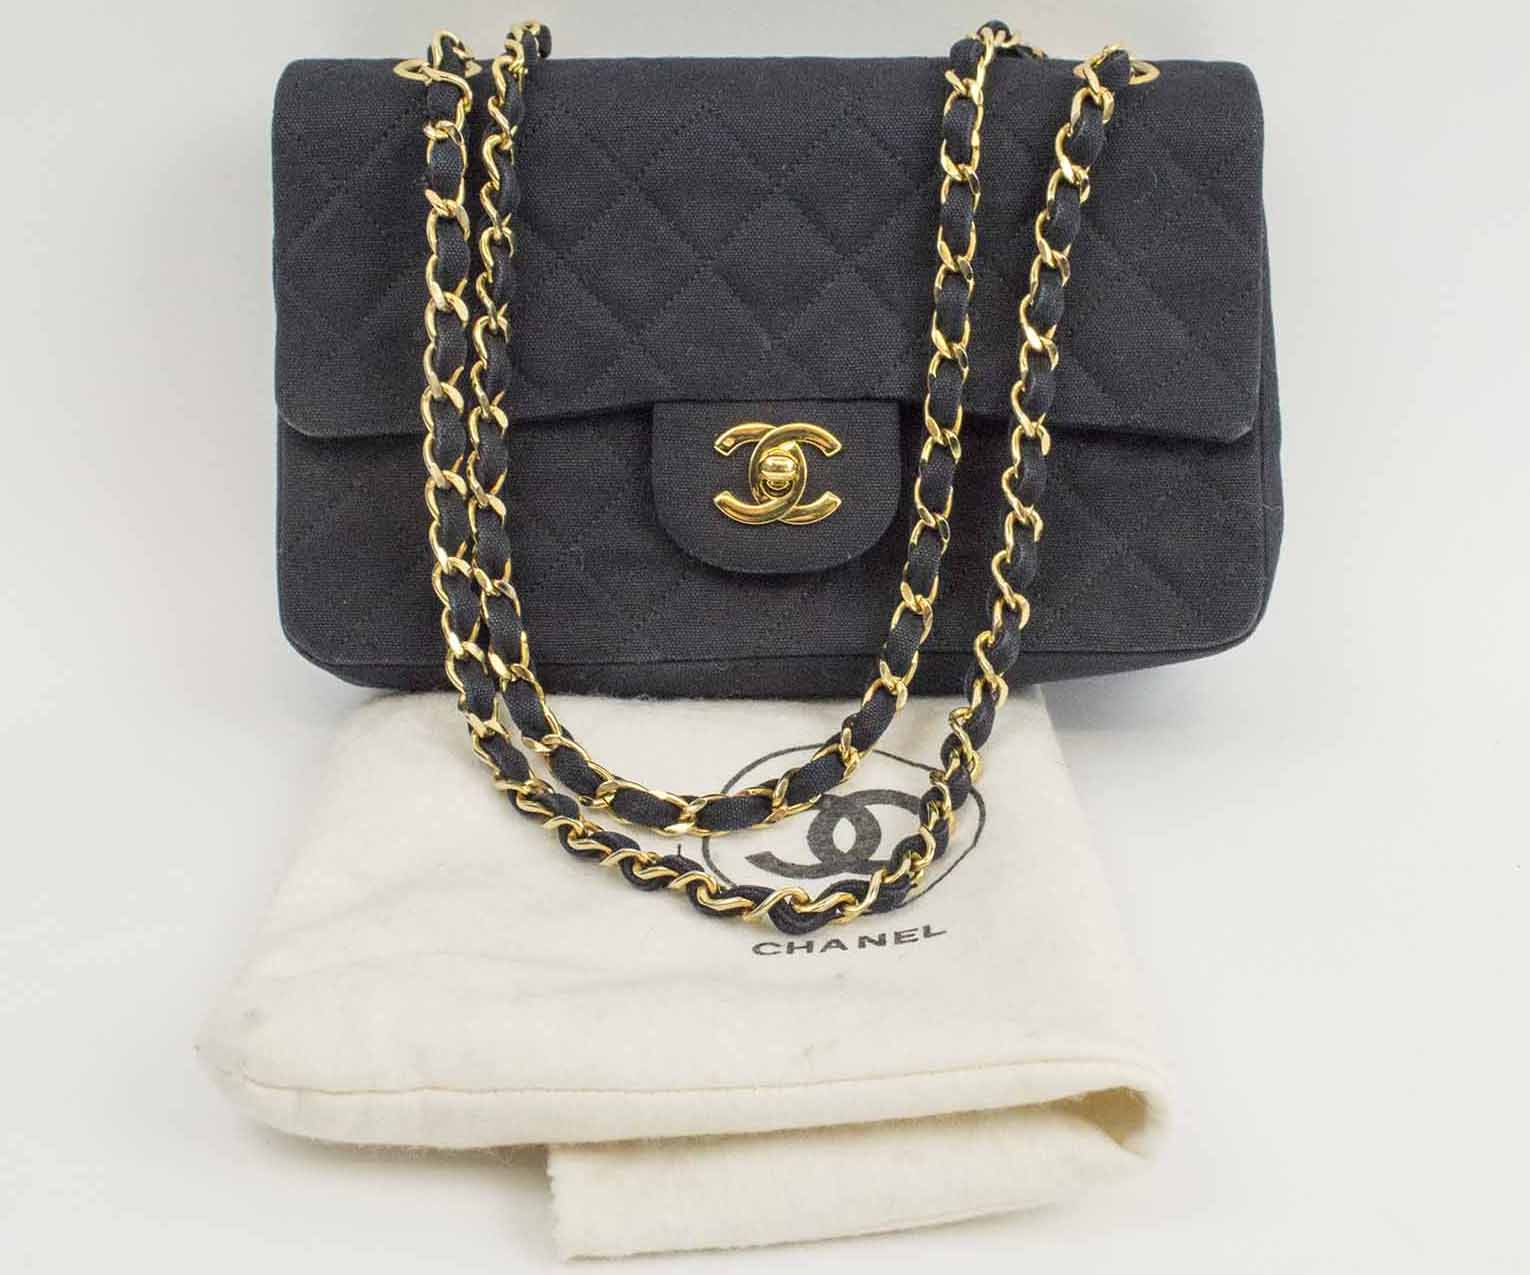 CHANEL CLASSIC FLAP BAG, black fabric with iconic burgundy leather lining,  gold tone hardware, sticker 1689505 1989/1991, 23cm x 14cm H x 6cm, with  dust bag.